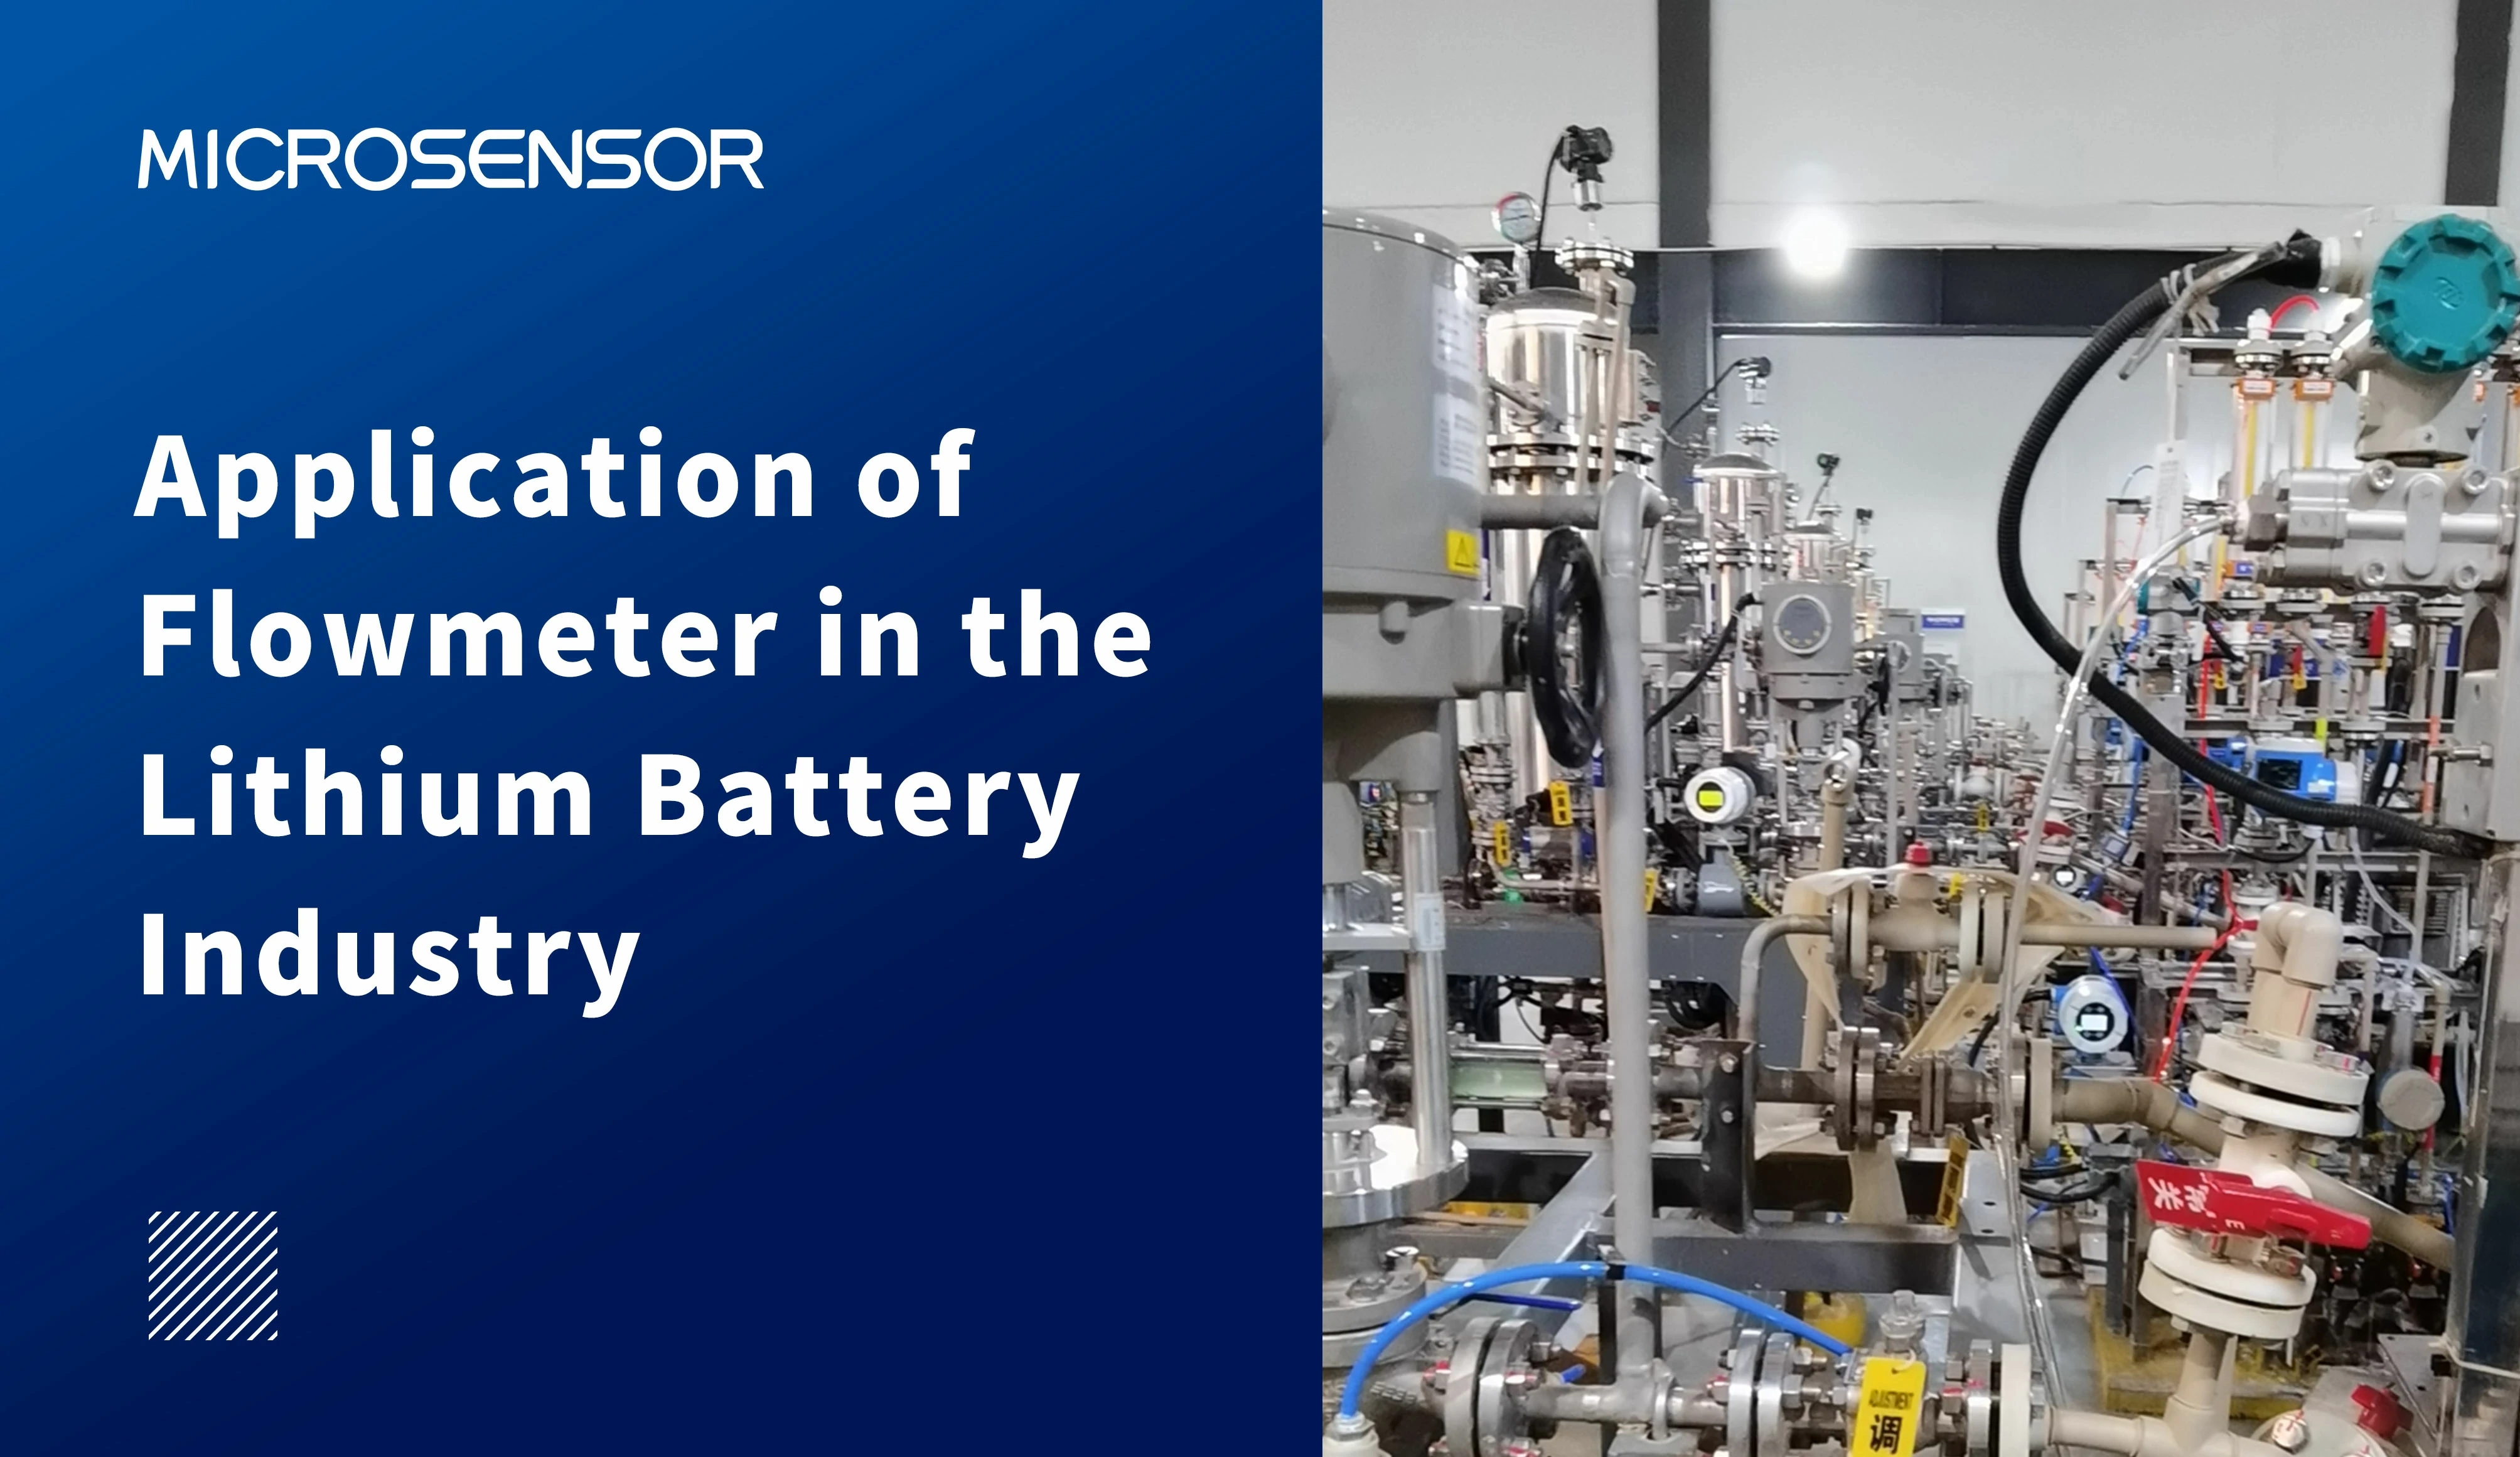 Application of Flowmeter in the Lithium Battery Industry